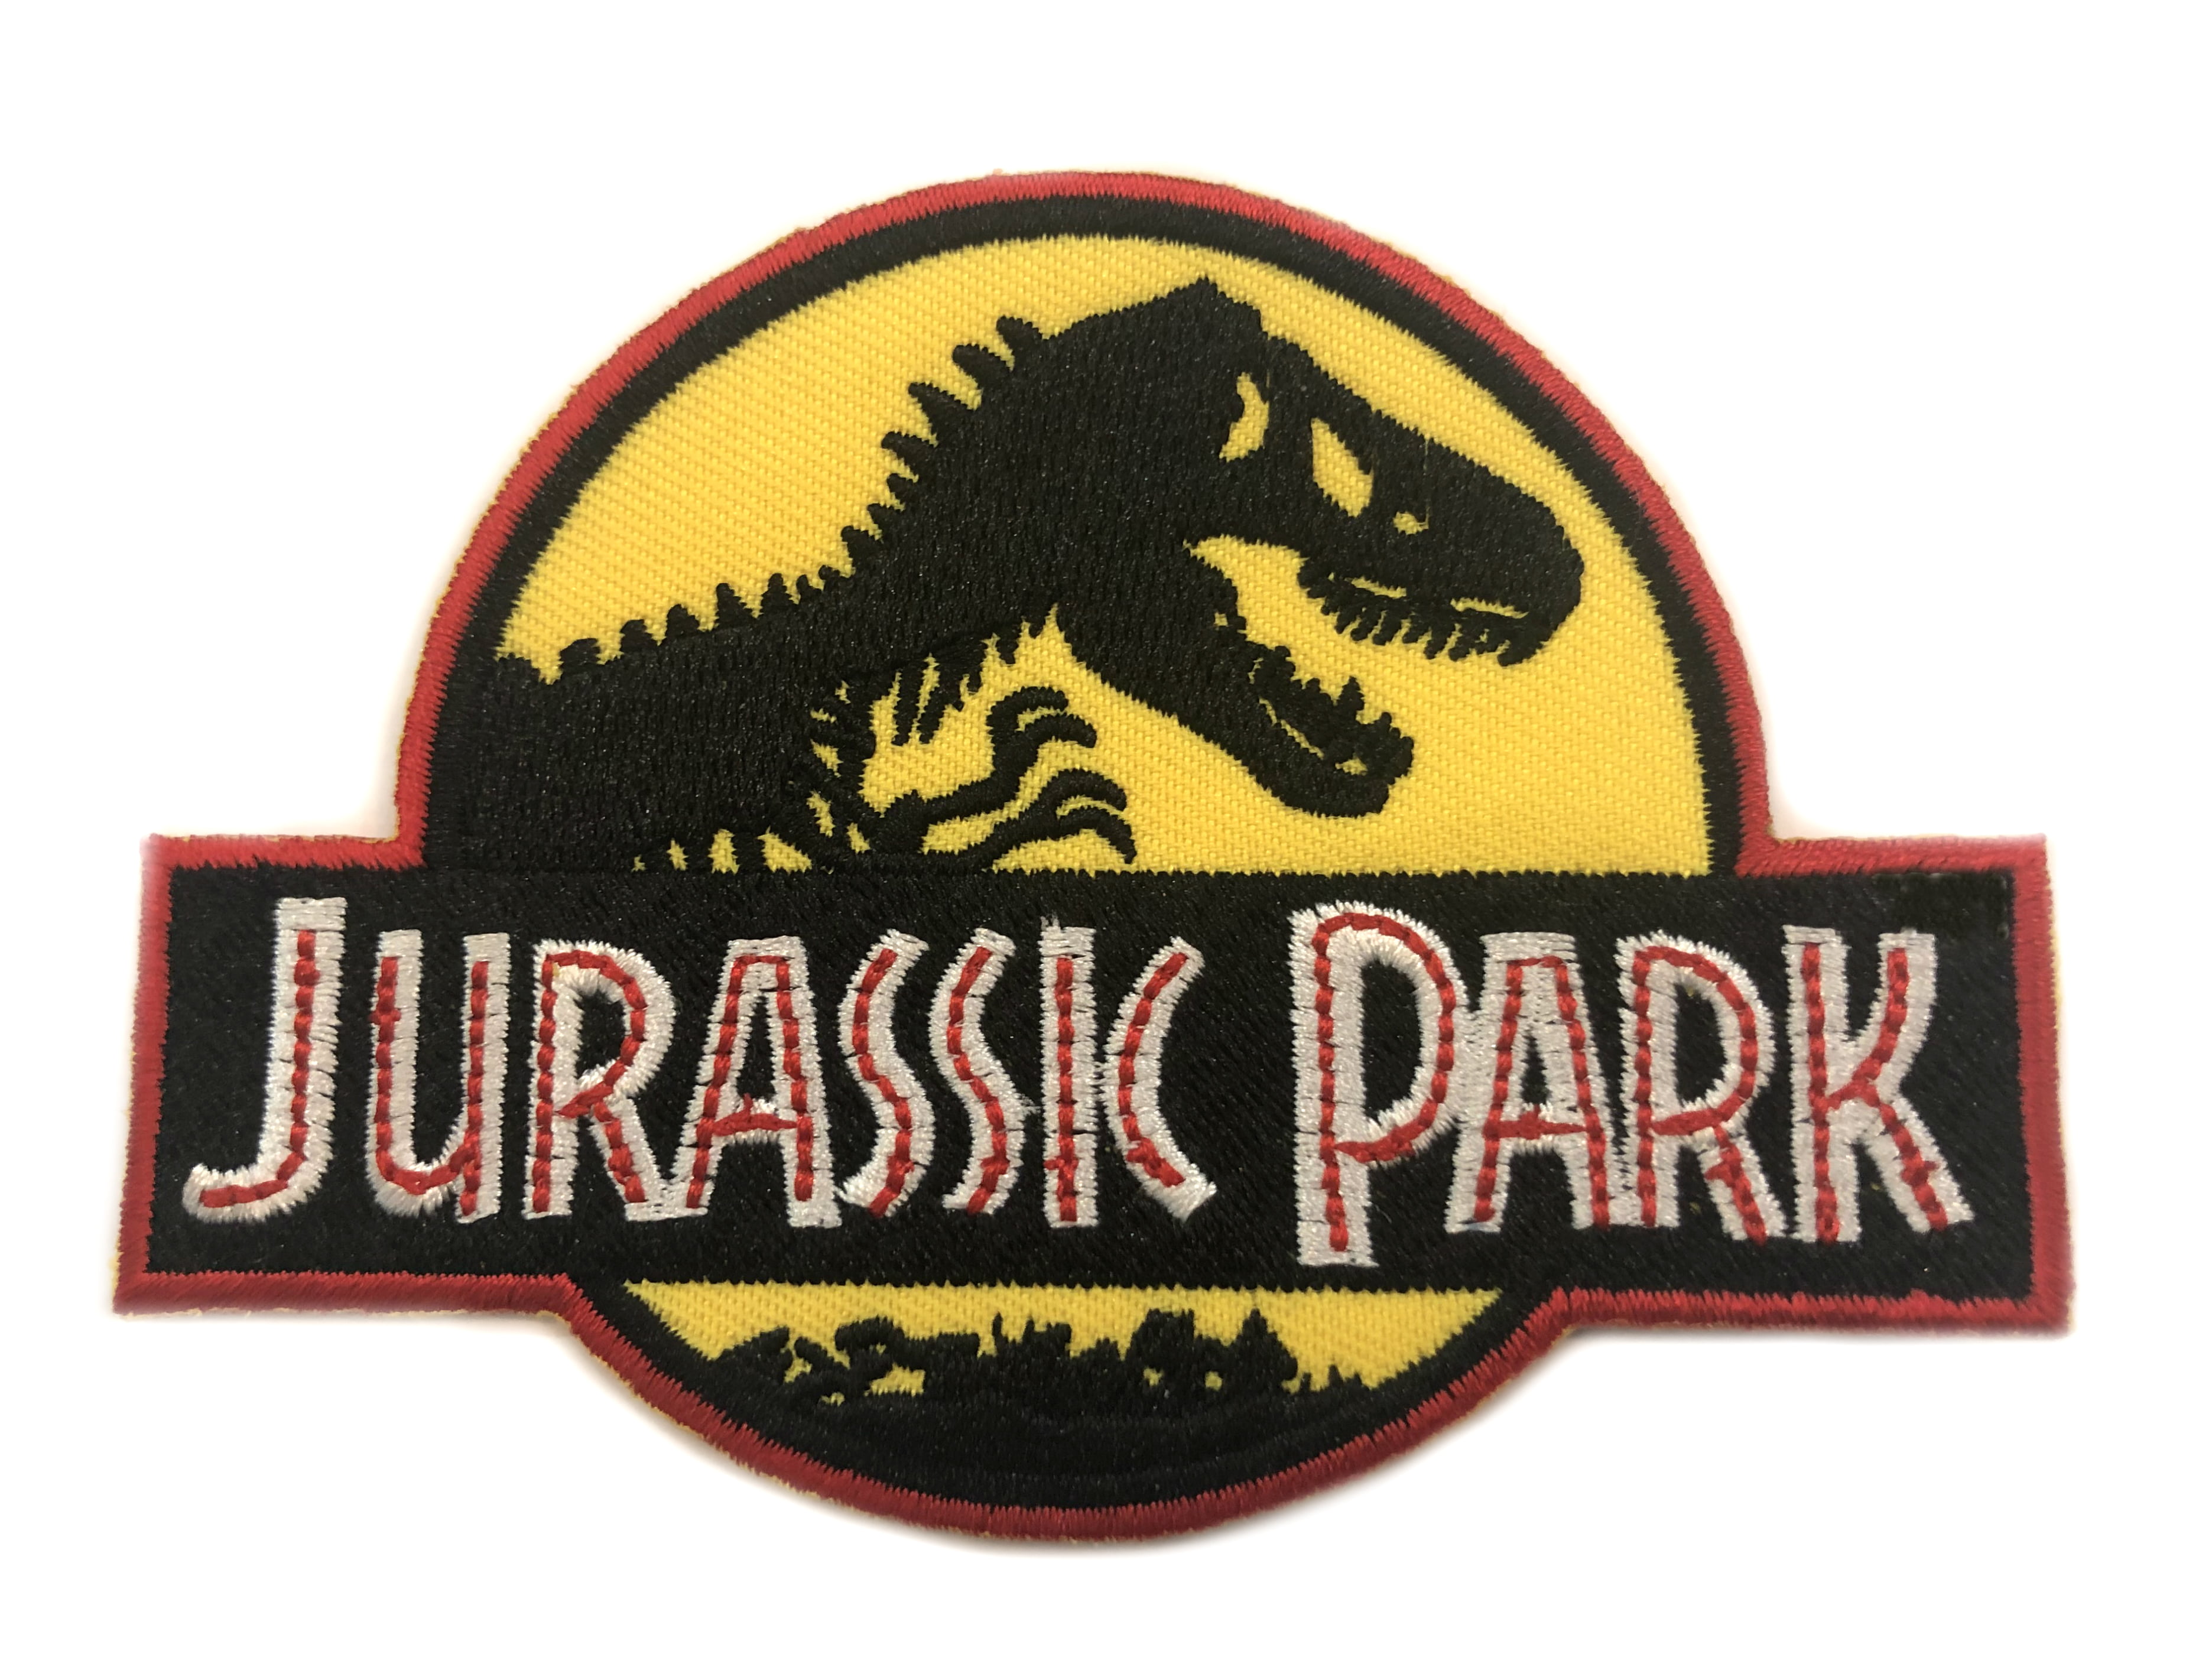 JURASSIC WORLD VETERINARY EMBROIDERED IRON 3.5 INCH PATCH 